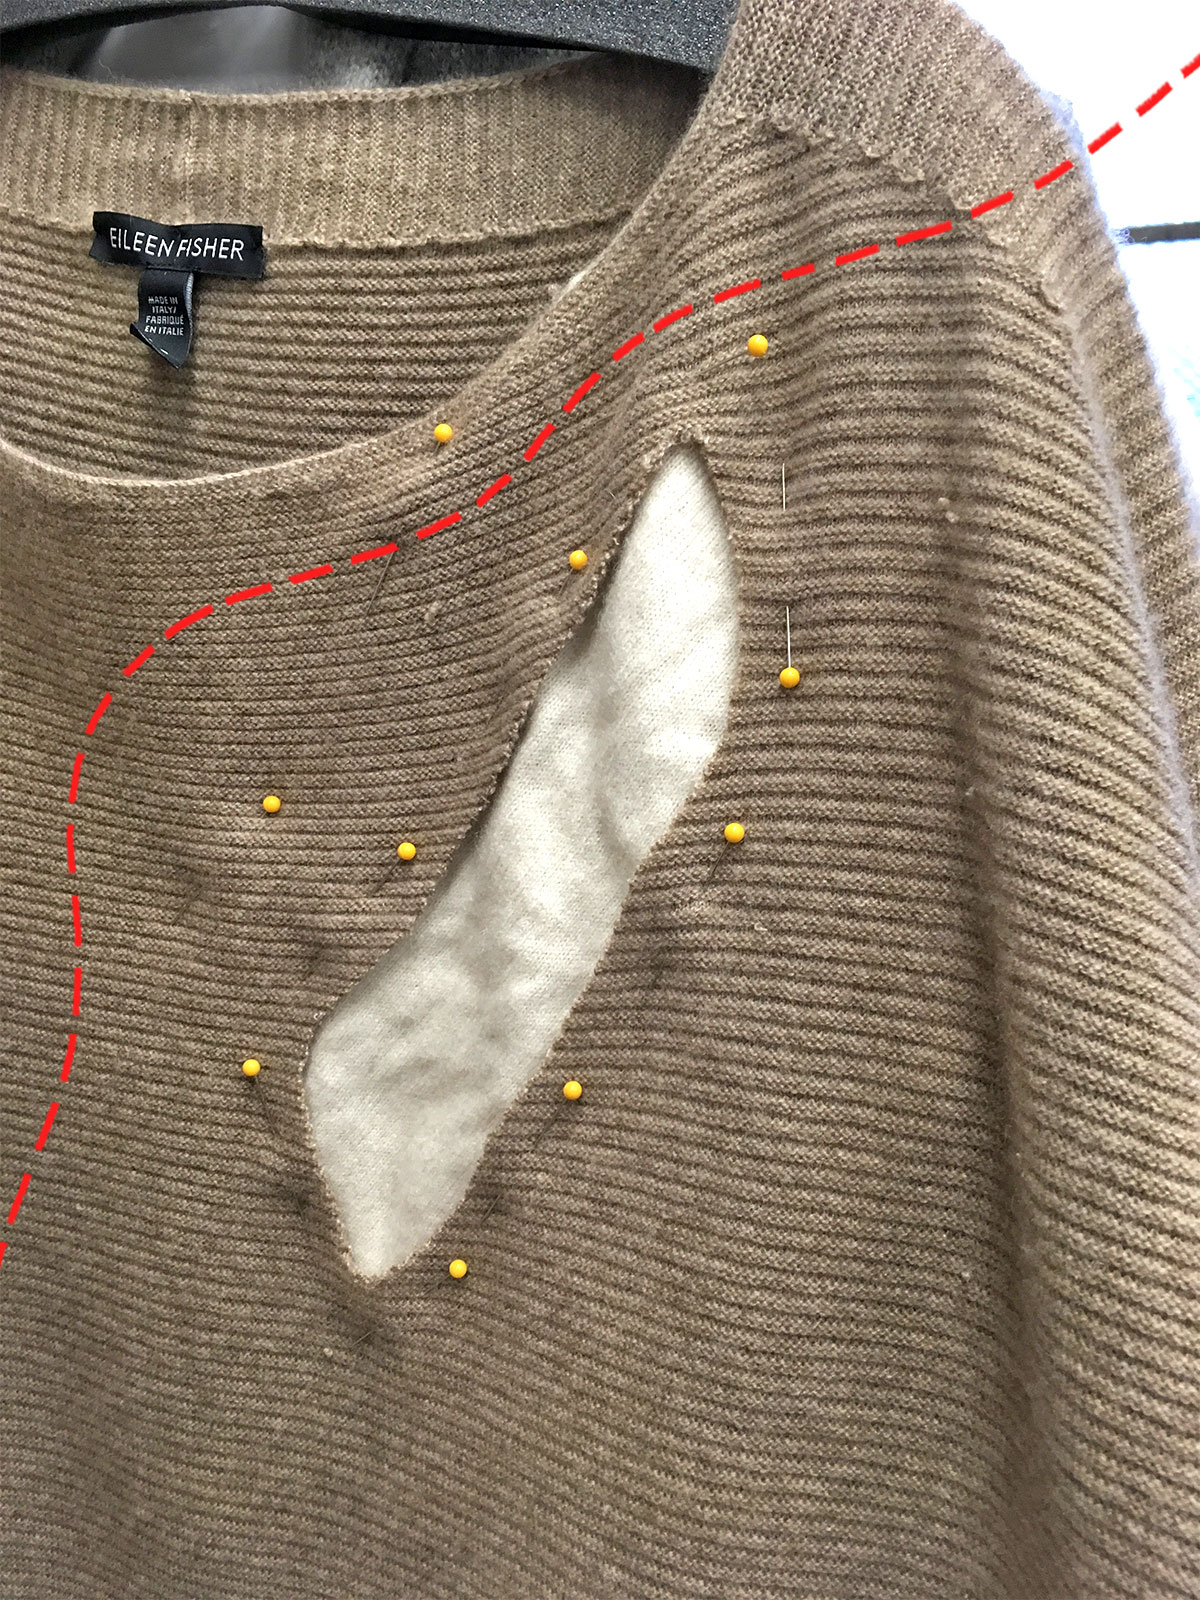 taupe sweater with white patch and yellow pins; drawn red stitches running over photo